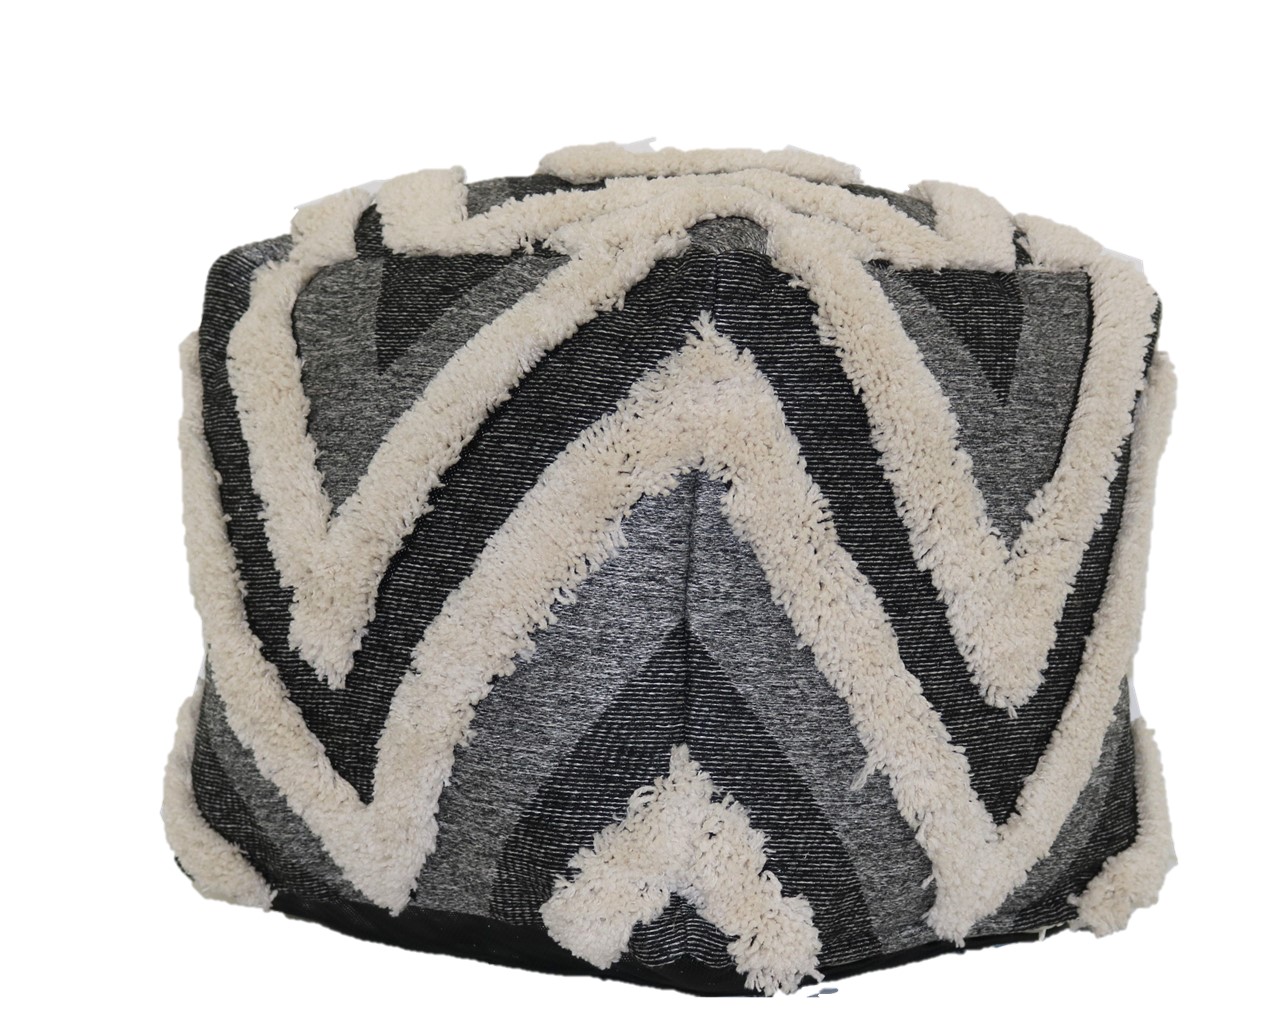 BH&G Tonal Tufted Outdoor Pouf, 16"x16"x16", Gray - image 2 of 5